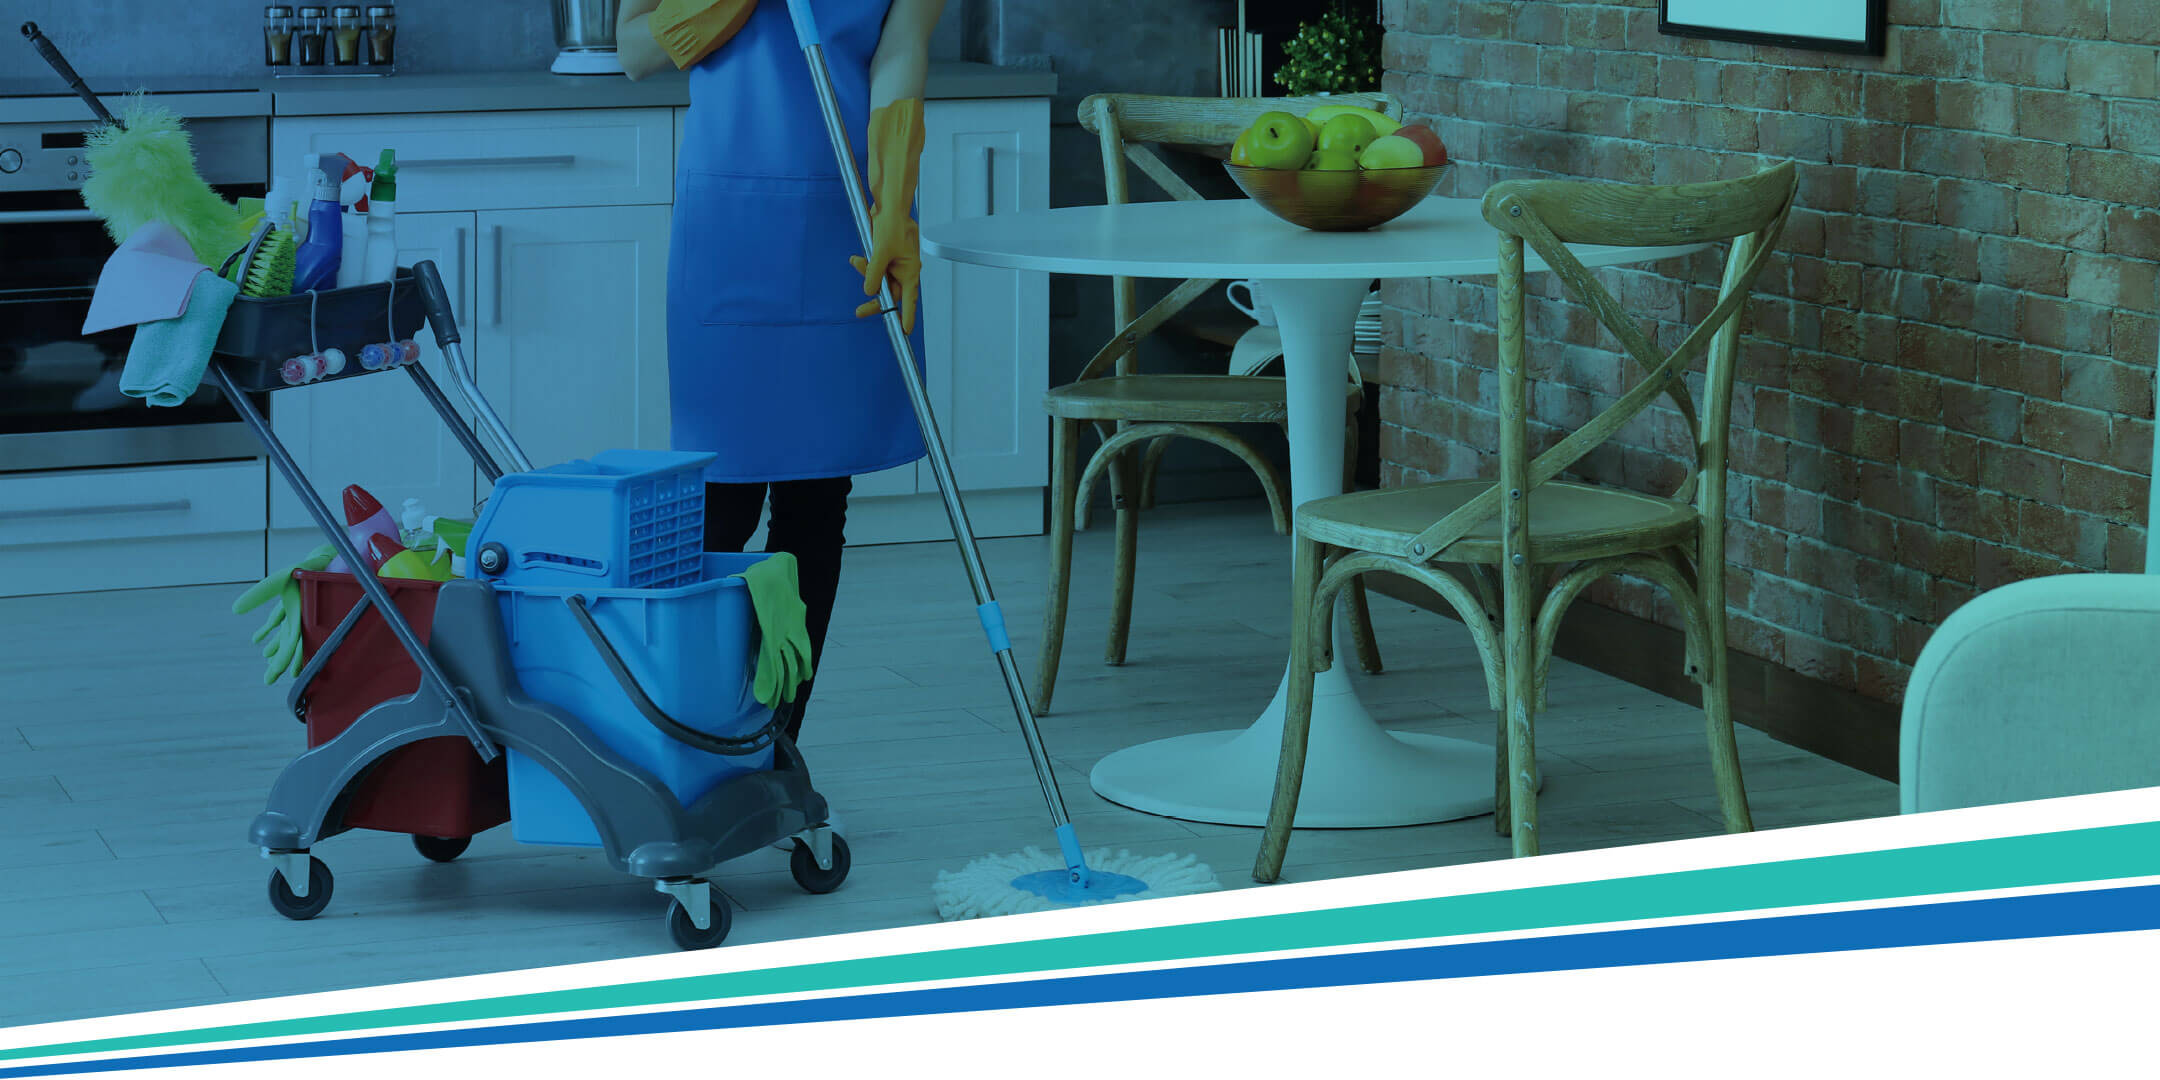 Housekeeping manager protecting your facility and premises - for desktop